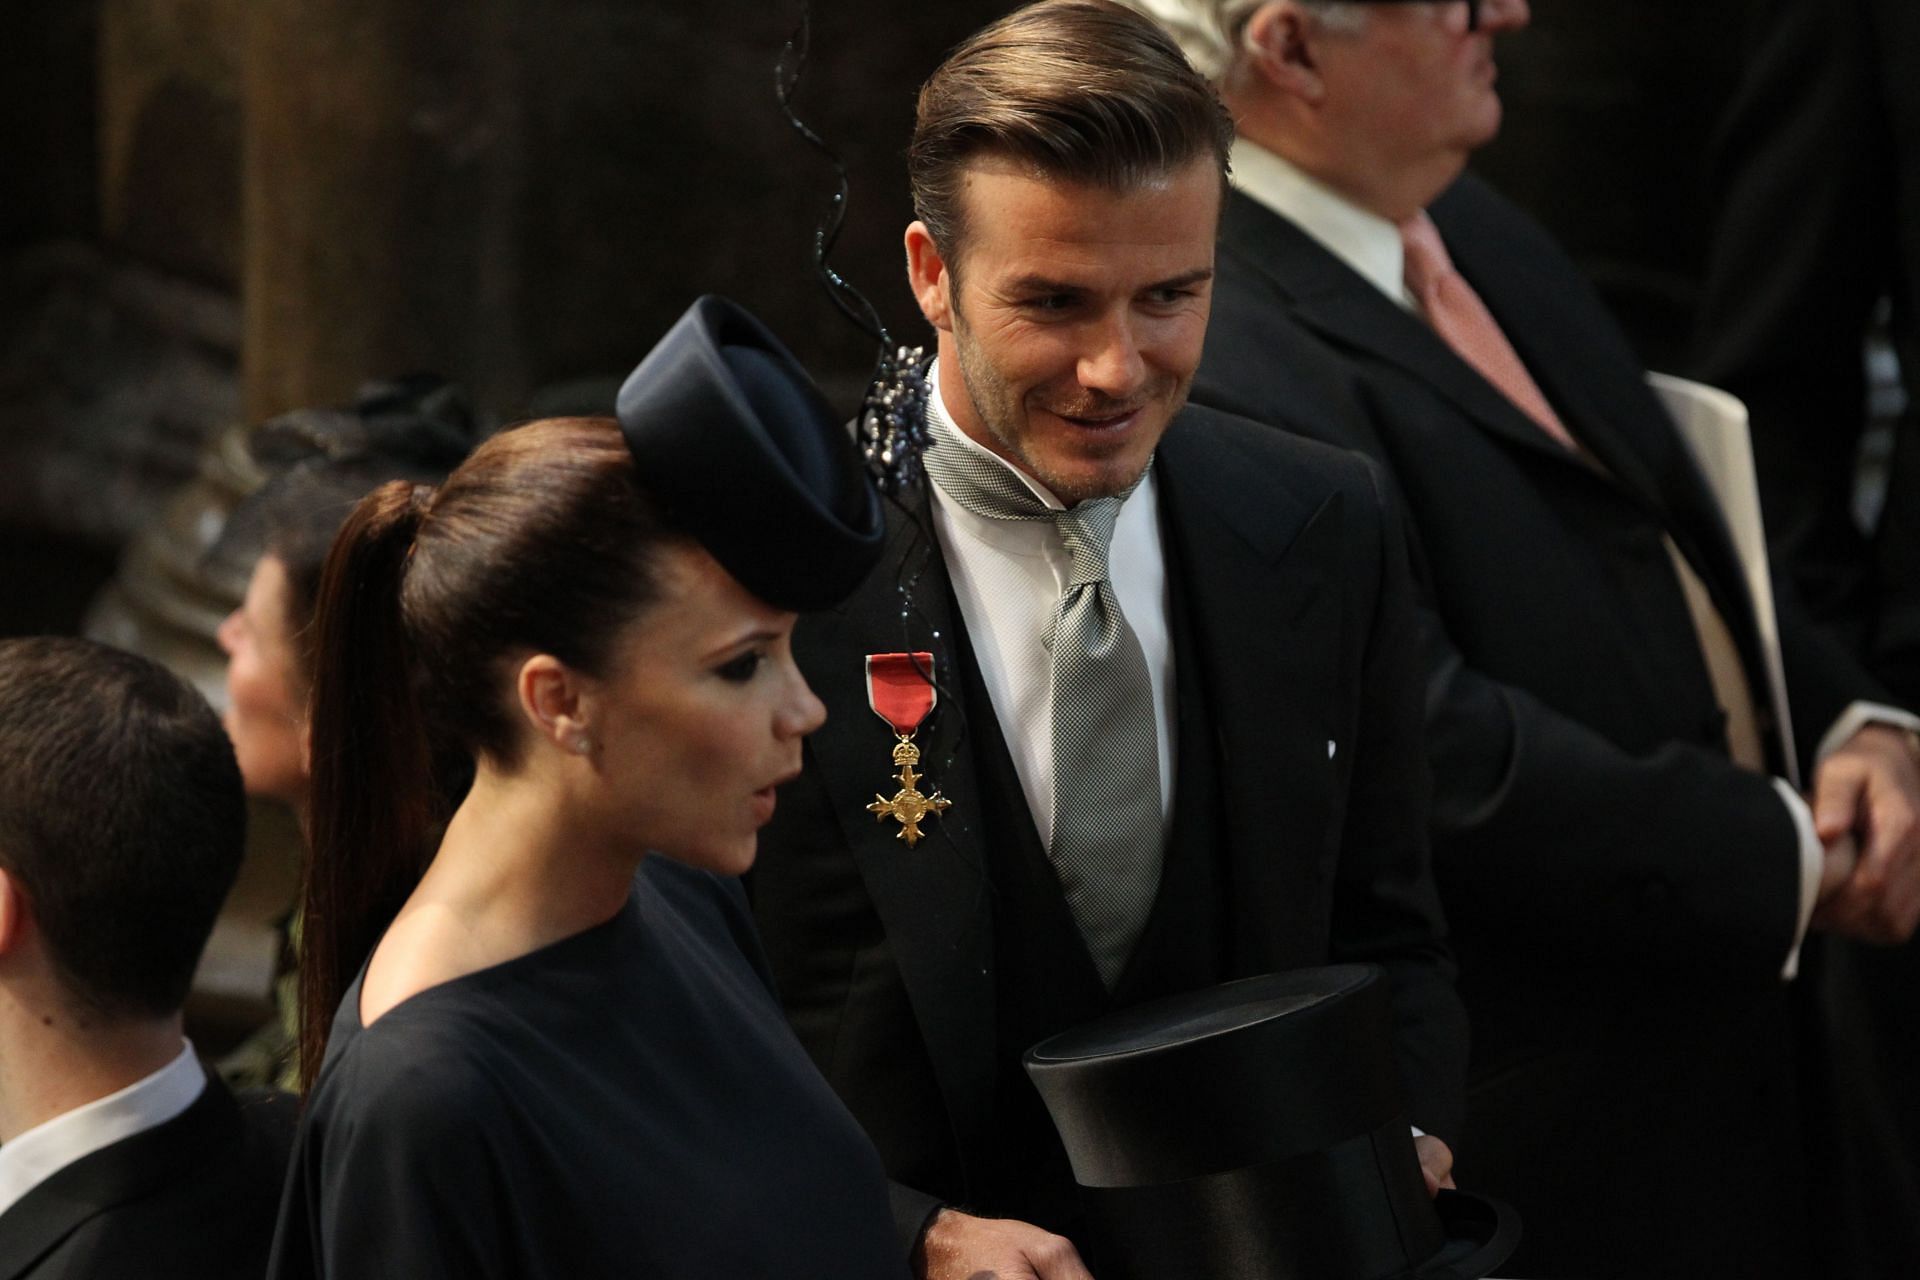 David Beckham and Victoria Beckham at Westminster Abbey (Source: Getty)